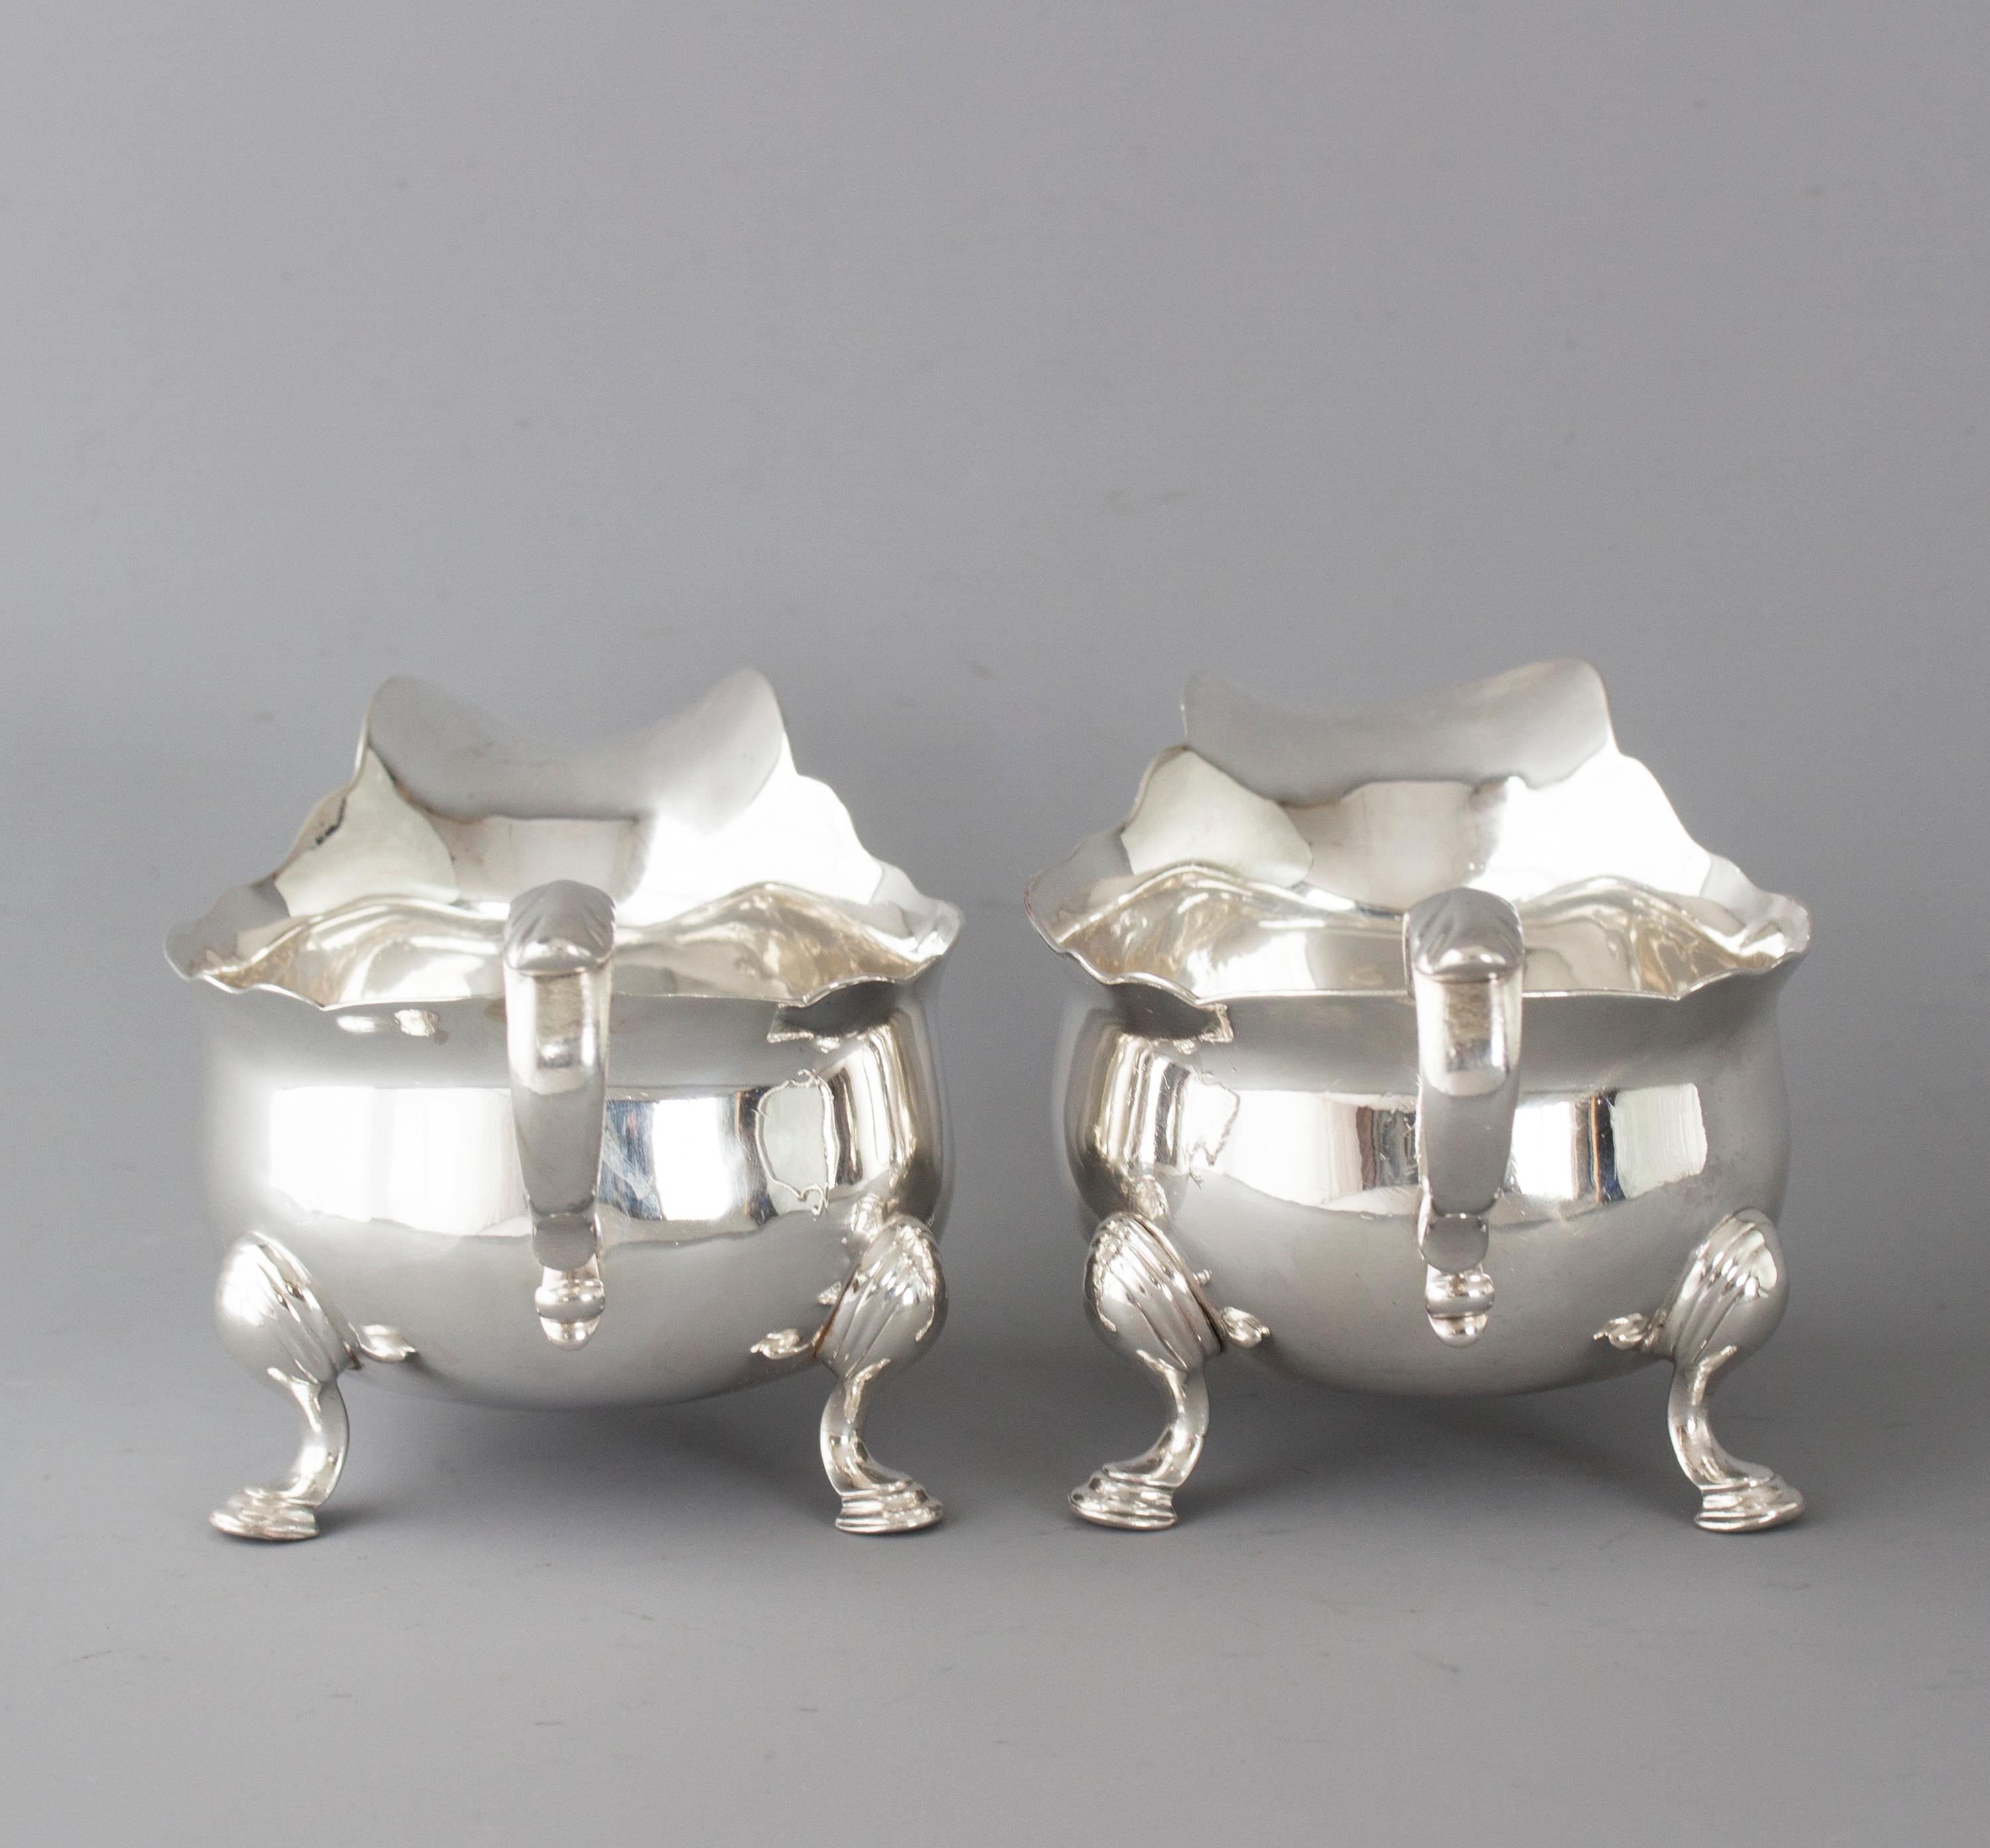 Mid-18th Century Pair of George II Silver Sauce Boats, London, 1737 by Benjamin West For Sale